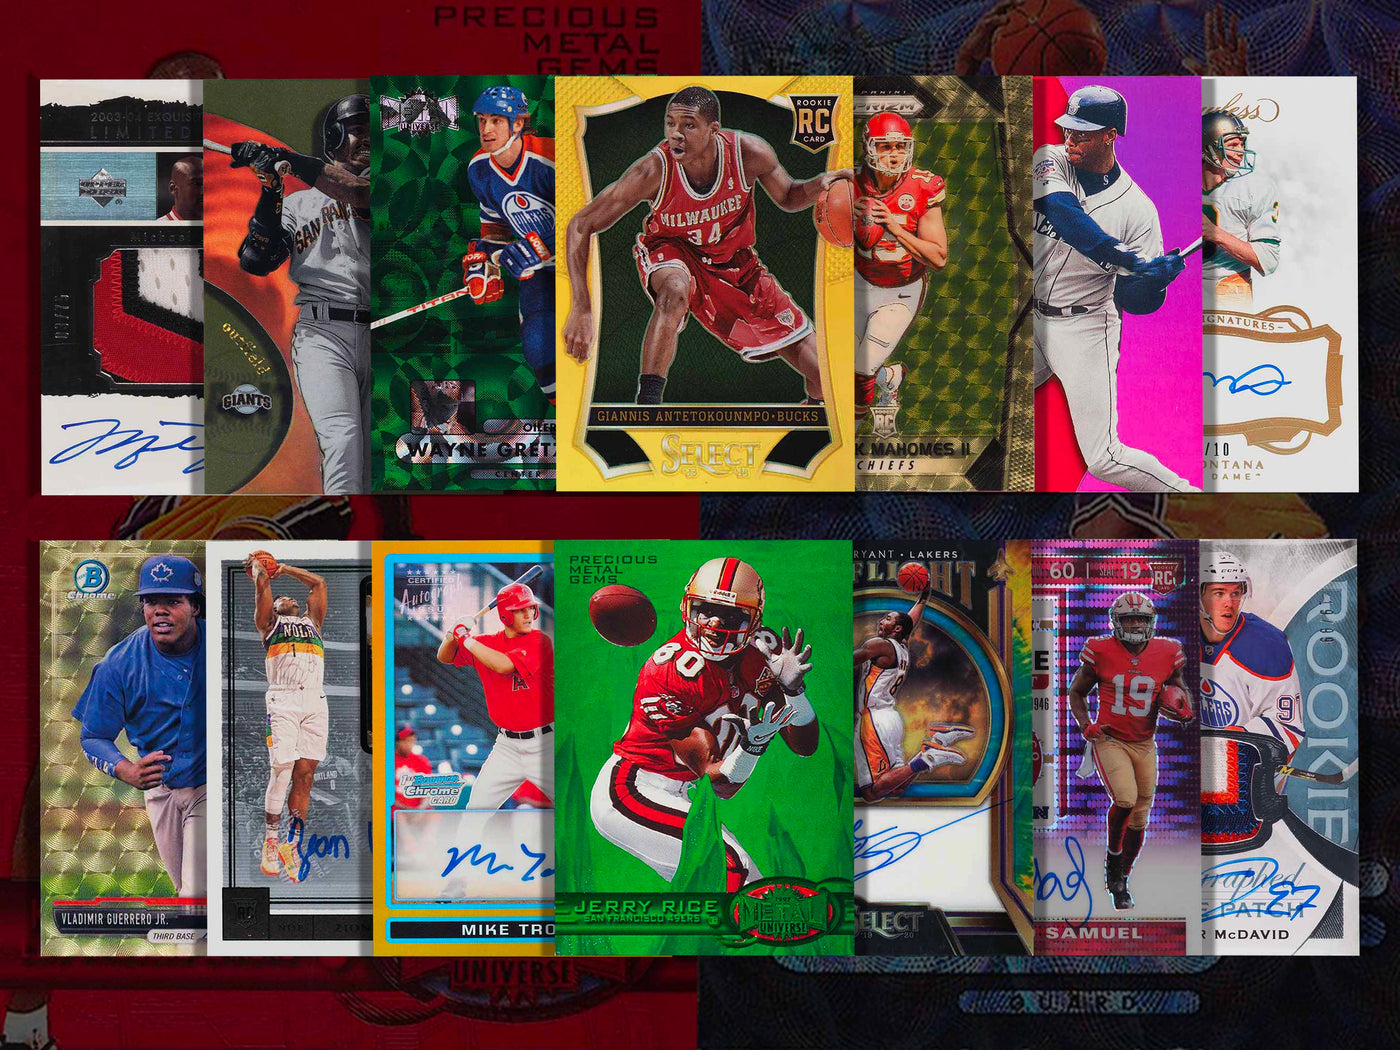 Fourteen different sports card inserts displayed on a white background, showcasing a variety of premium styles including Gold Refractors, Gold Prizms, Essential Credentials, Gold Vinyls, Green PMGs, Rookie Patch Autos (RPA), and Super Short Prints (SSP)